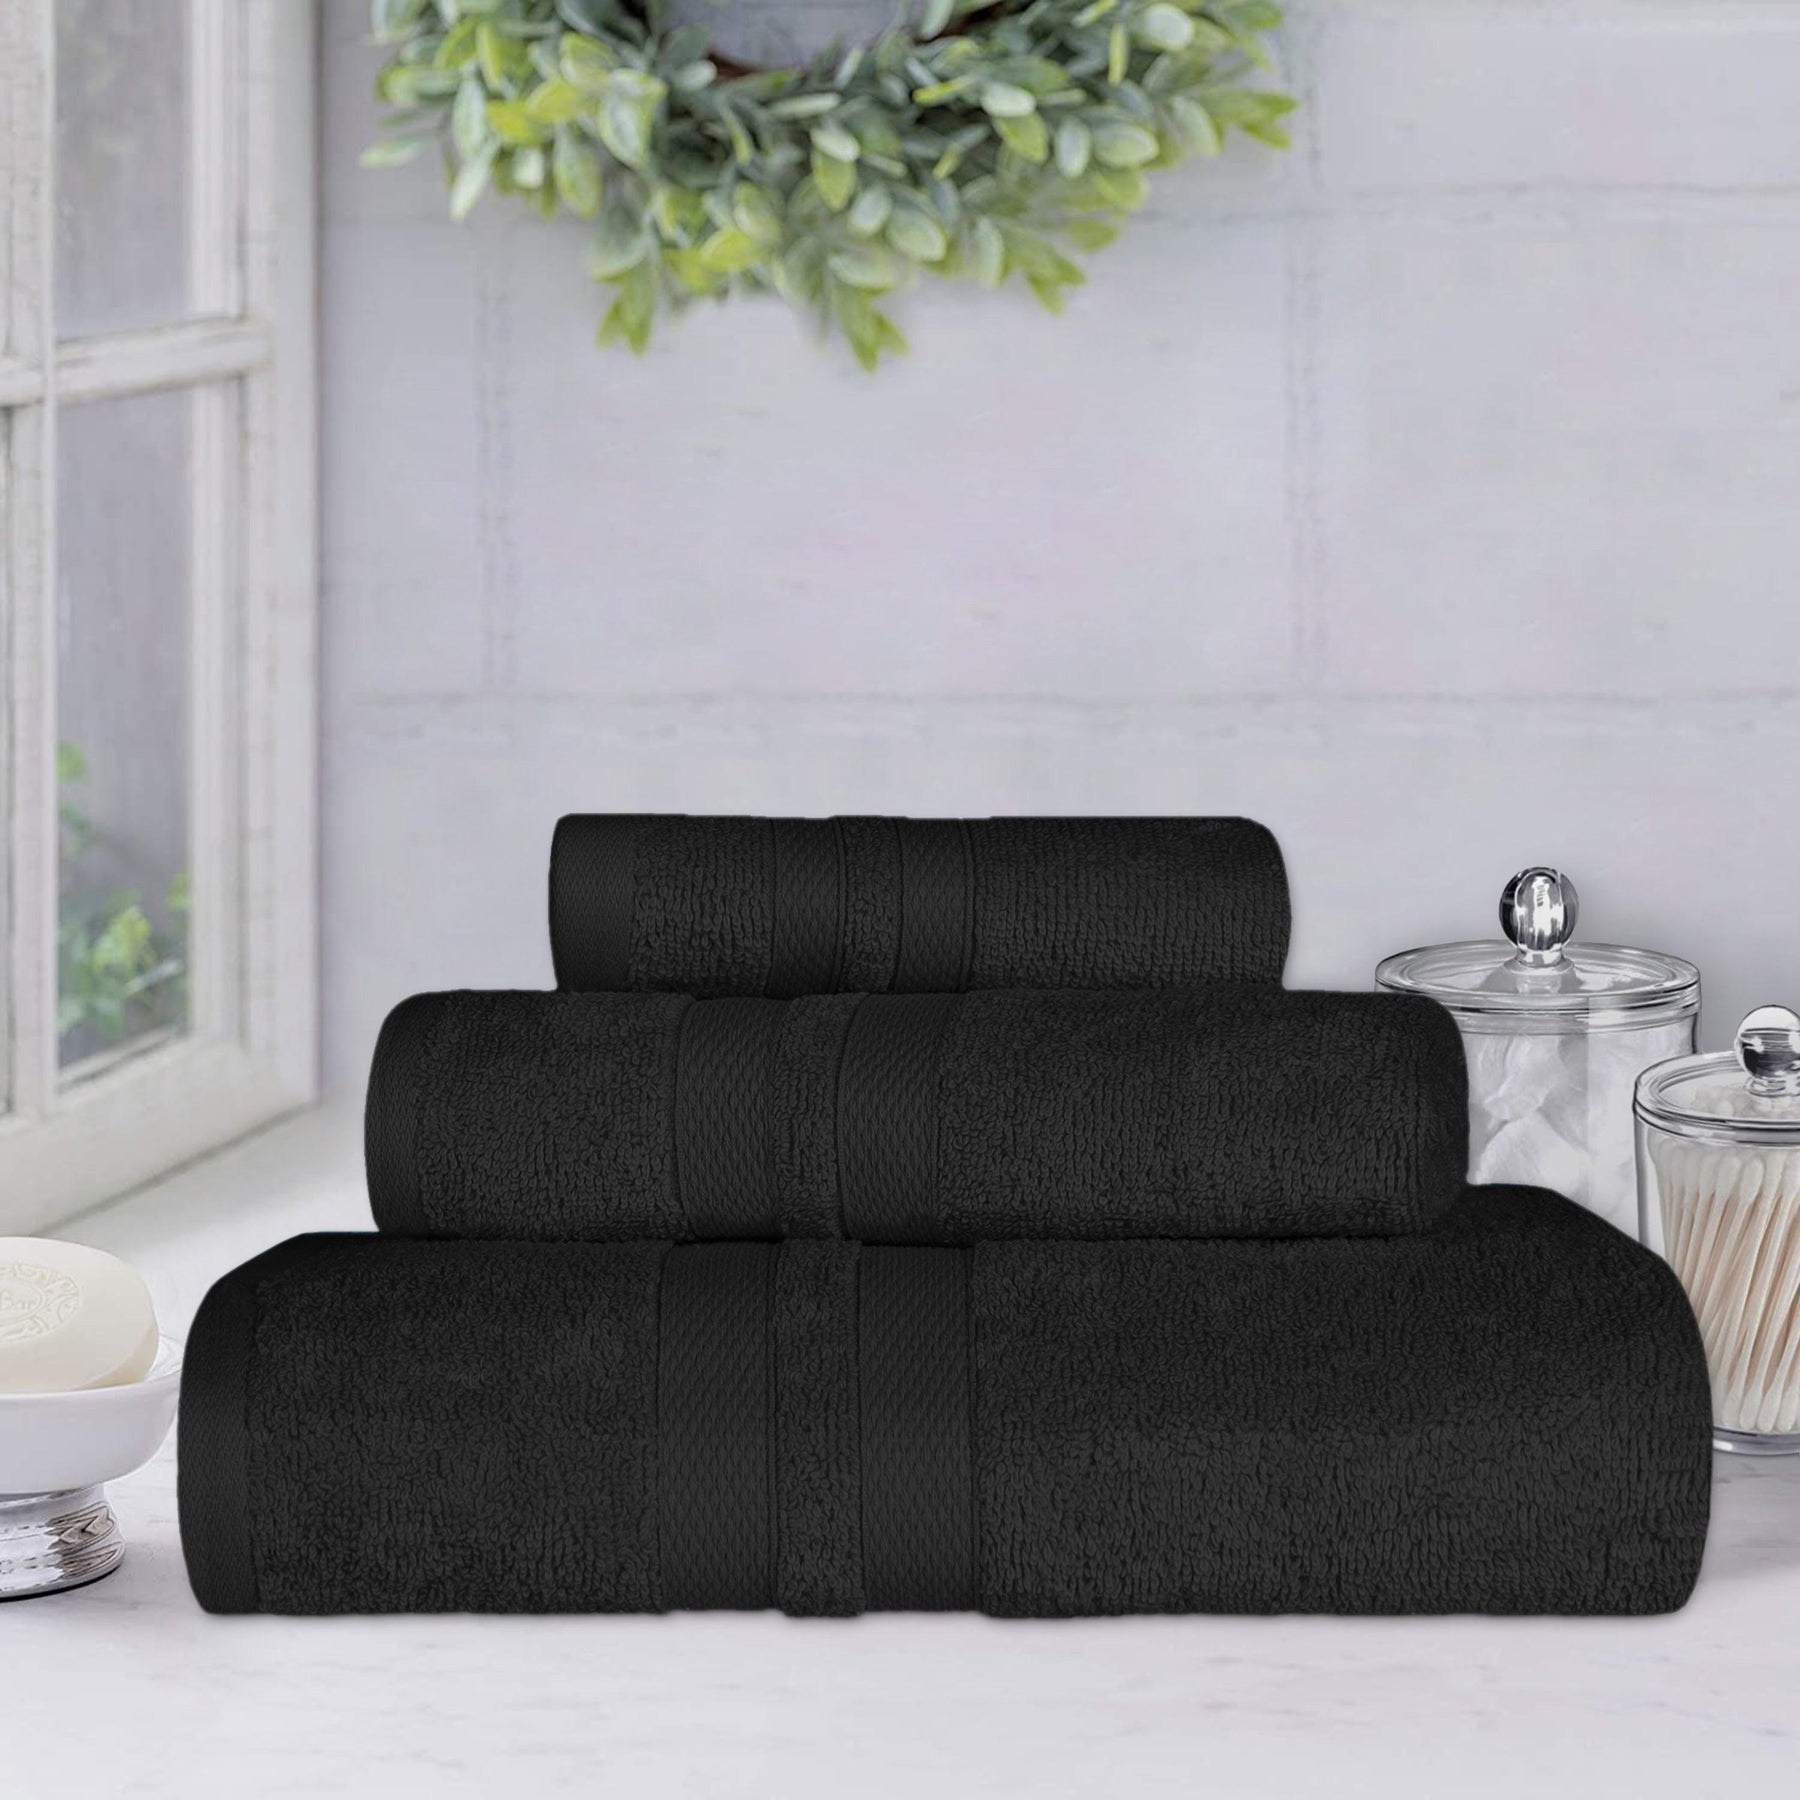 Superior Ultra Soft Cotton Absorbent Solid Assorted 3-Piece Towel Set - Black